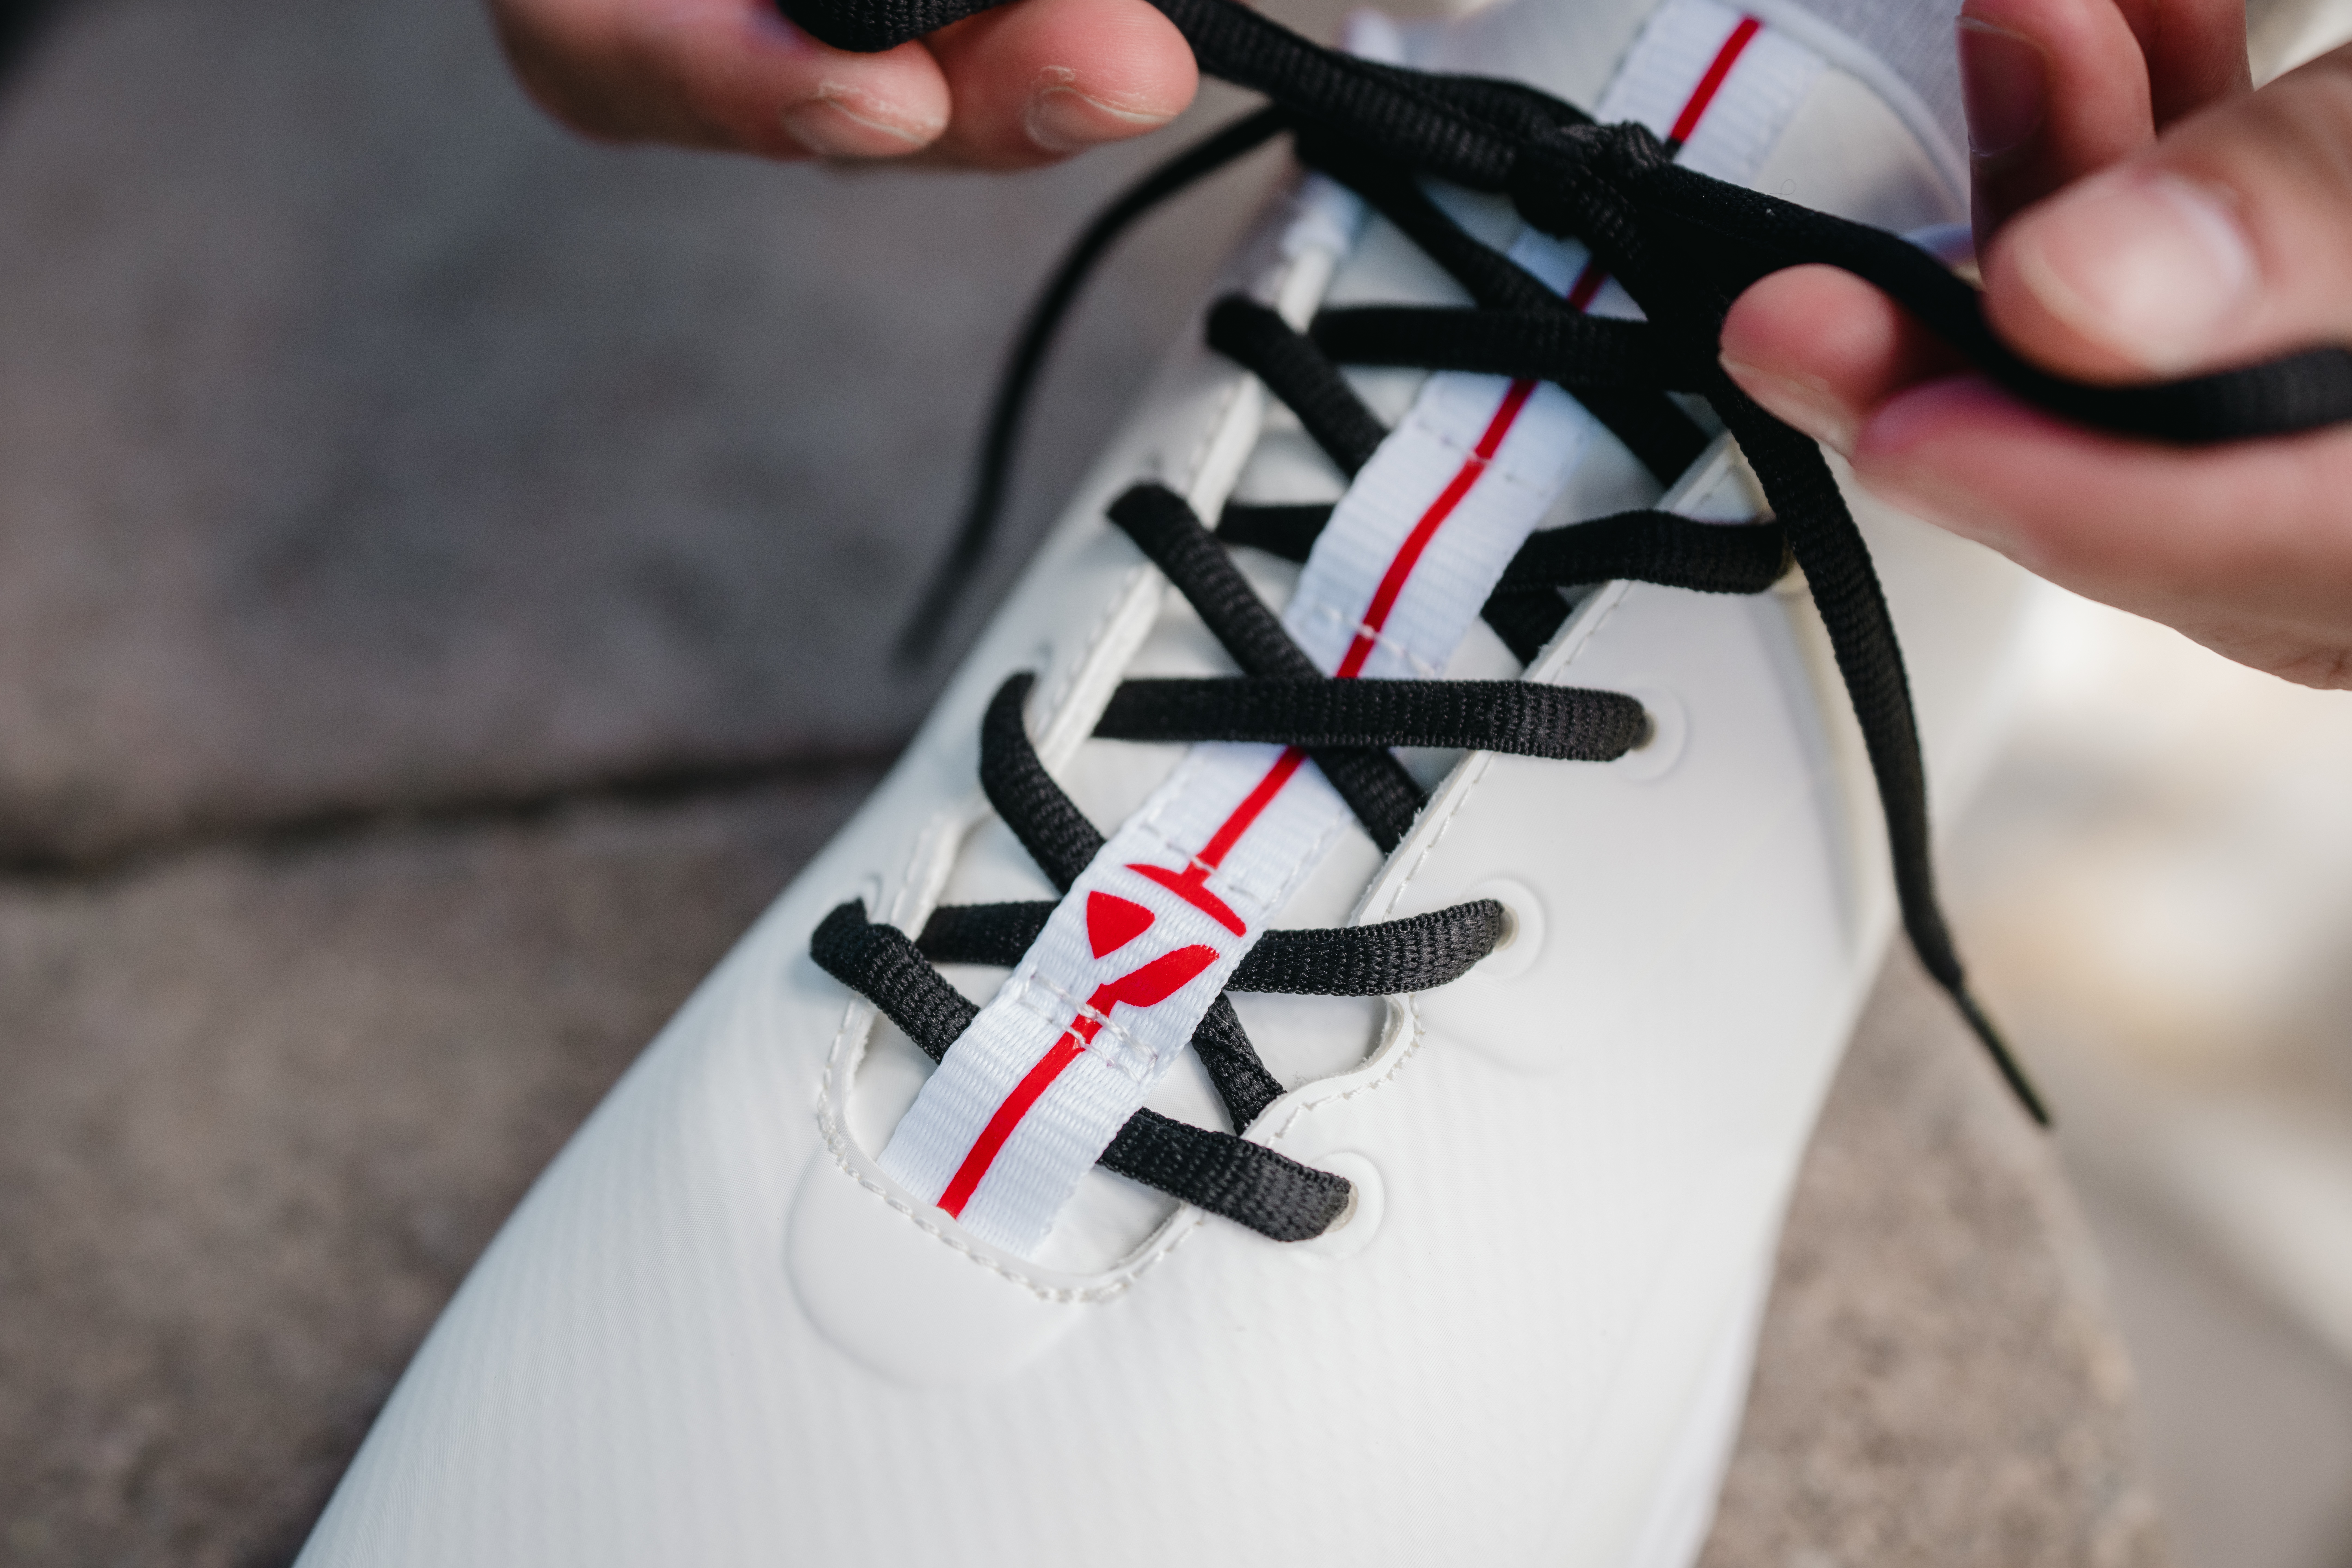 TaylorMade and G/Fore team up for sleek golf shoe collaboration